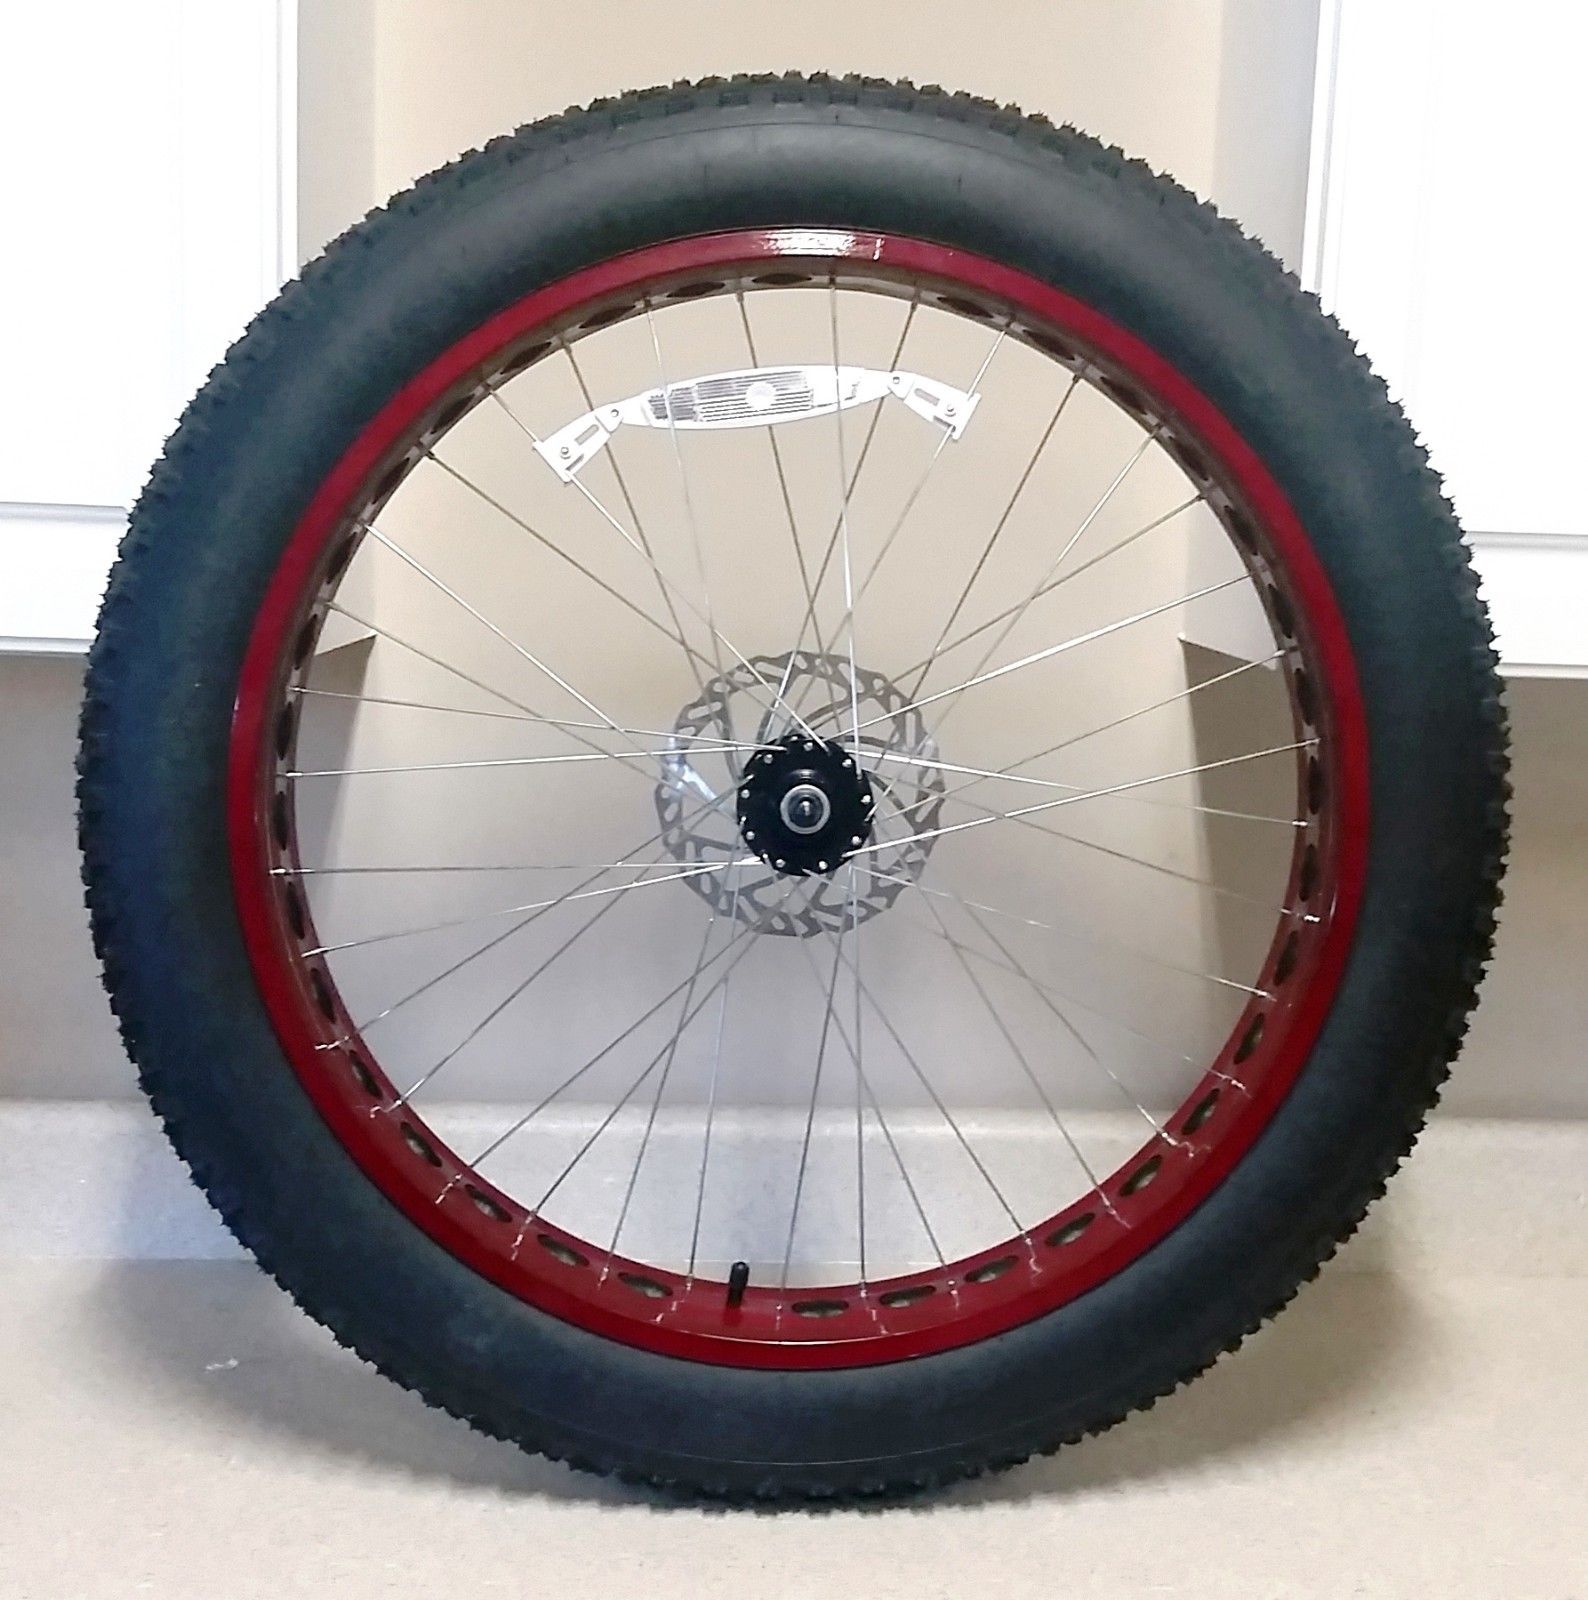 Mongoose Malus Fat Tire Bicycle Front Wheel/Tire Assembly, Red, 26 x 4.